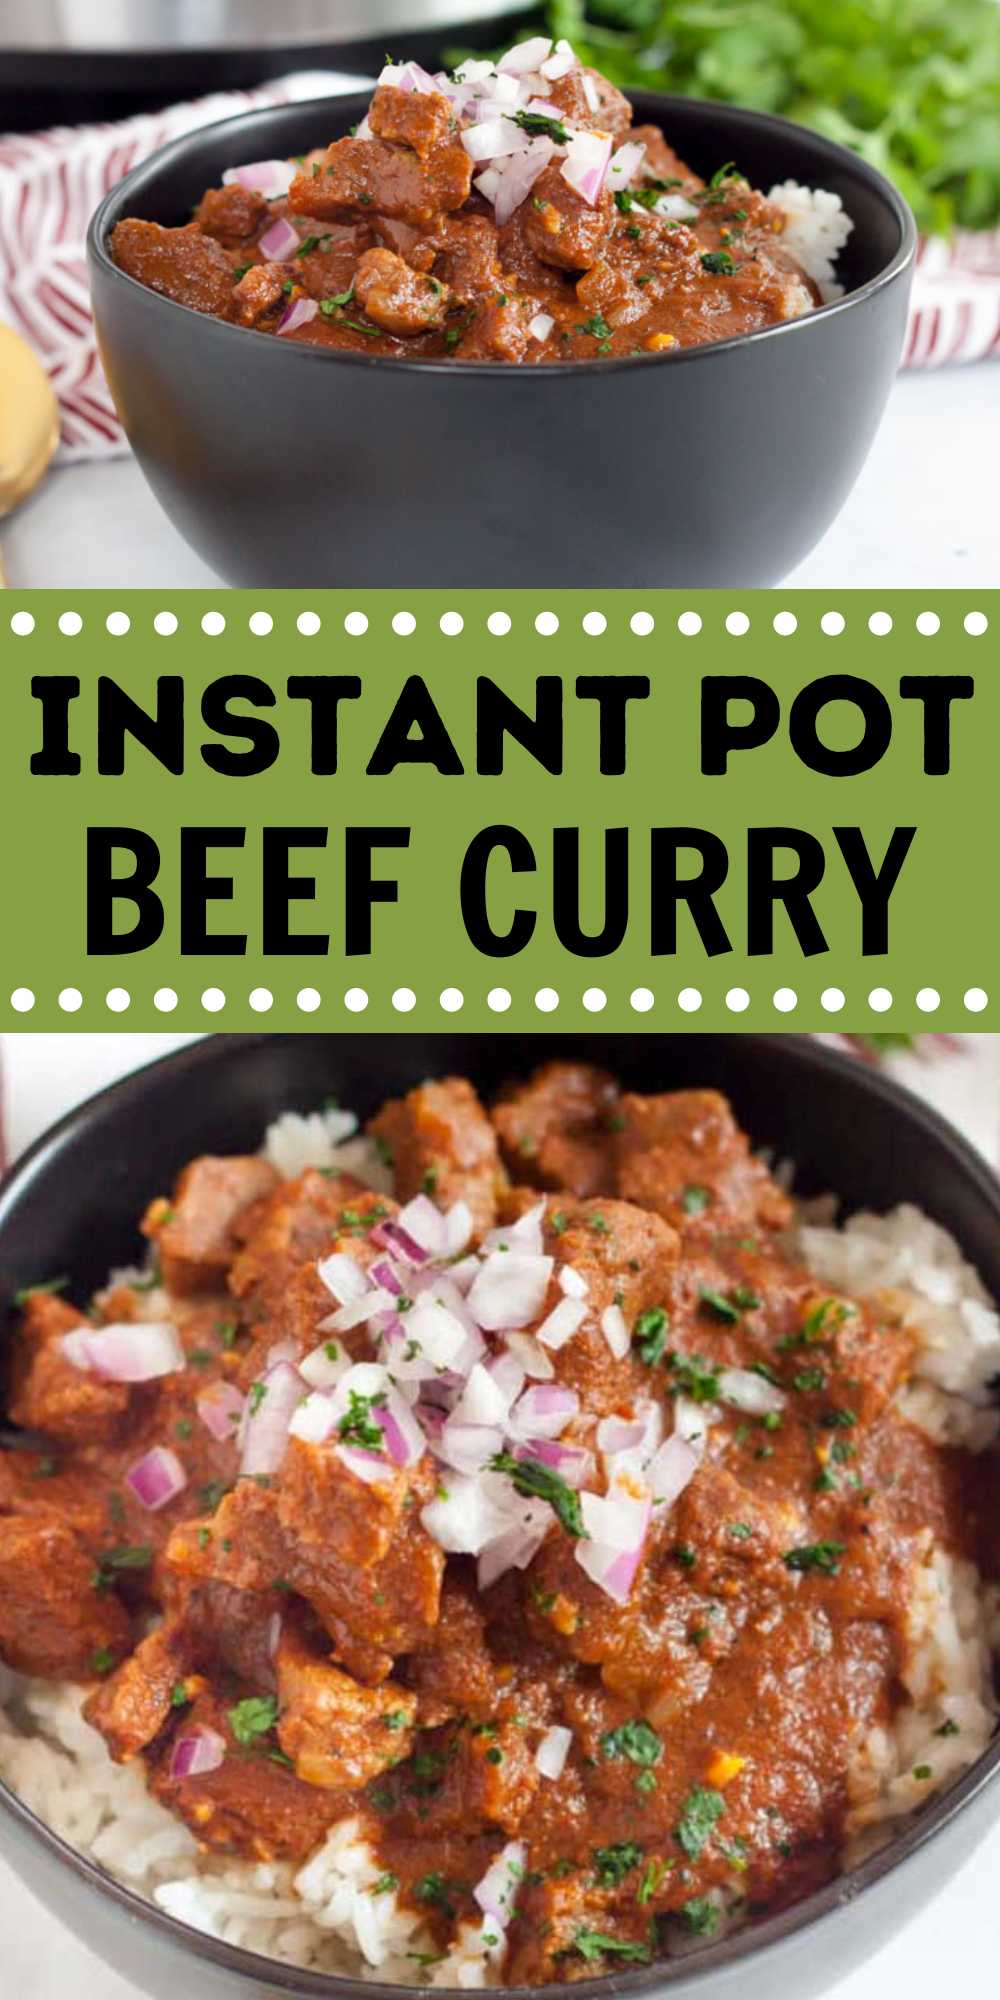 Turn inexpensive beef into something spectacular with this Instant Pot Beef Curry Recipe. Easy, delicious and budge friendly recipe. The meat is so tender that you will think it was slow cooked all day instead of cooked in the instant pot in minutes. #eatingonadime #instantpotbeefcurry #beefcurryrecipe